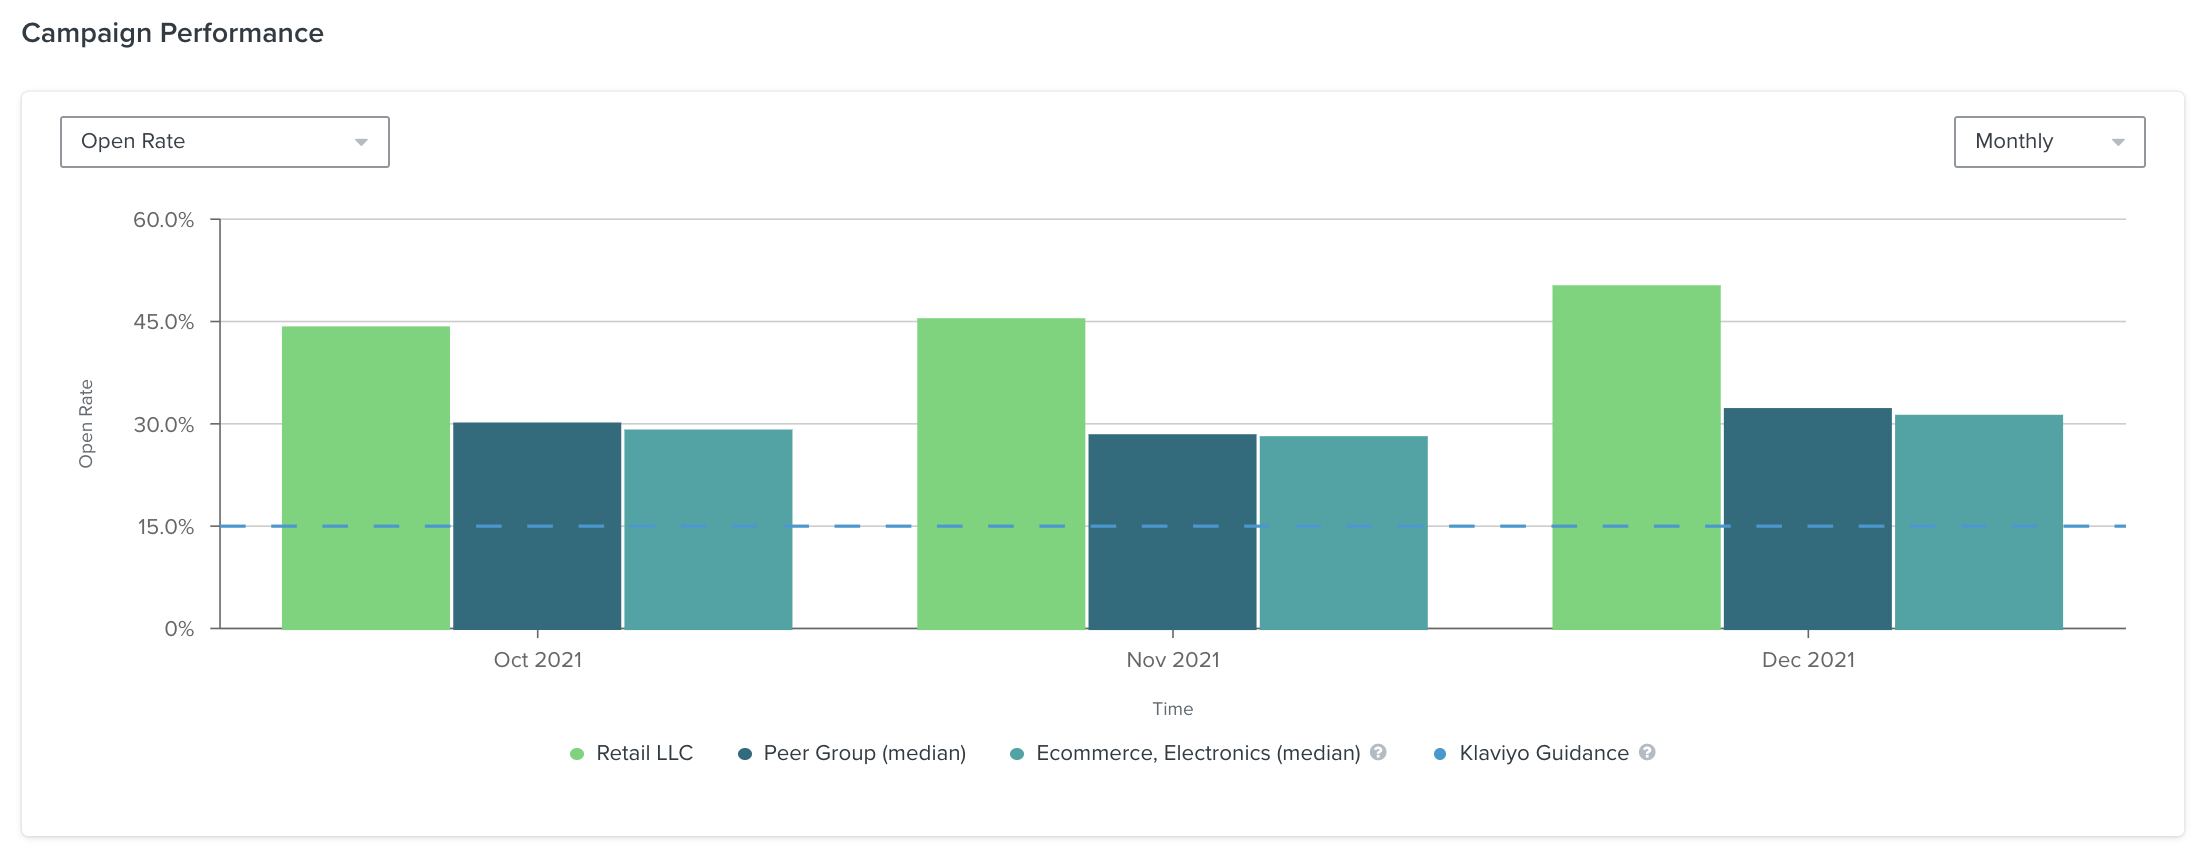 Example of a bar graph inside the Email Campaign Performance page showing open rate monthly